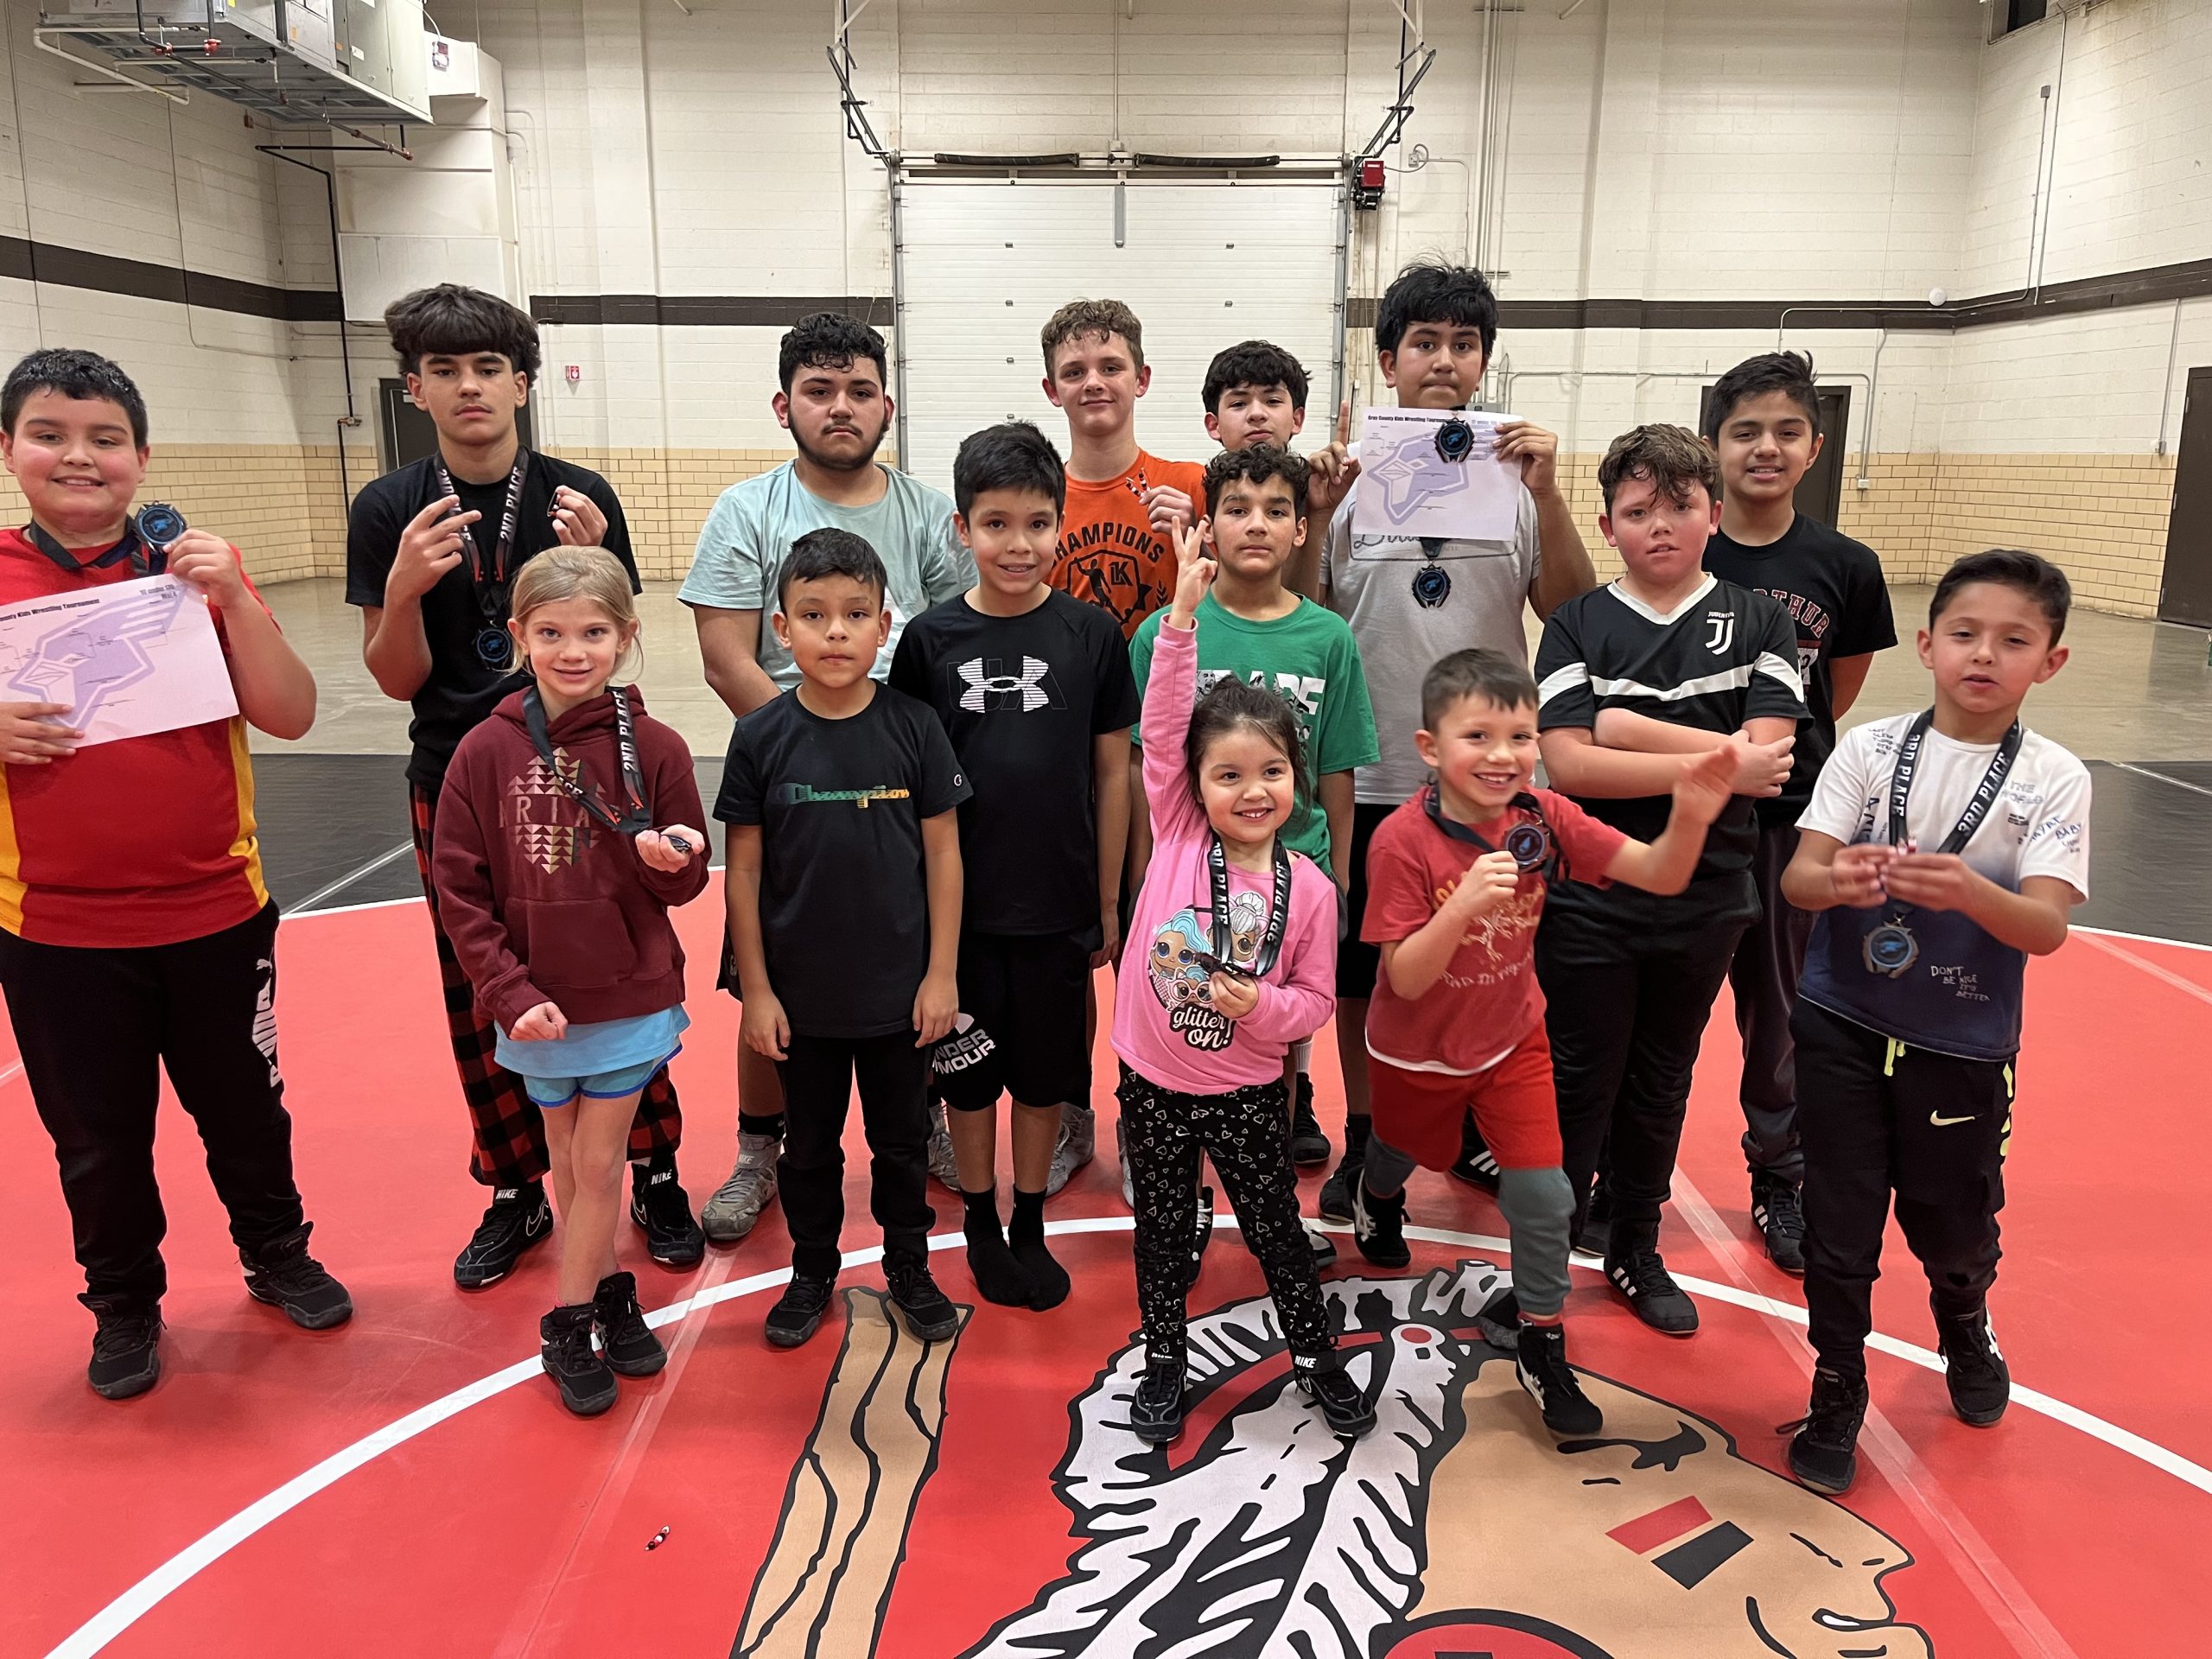 Liberal Wrestling Club Goes to Cimarron